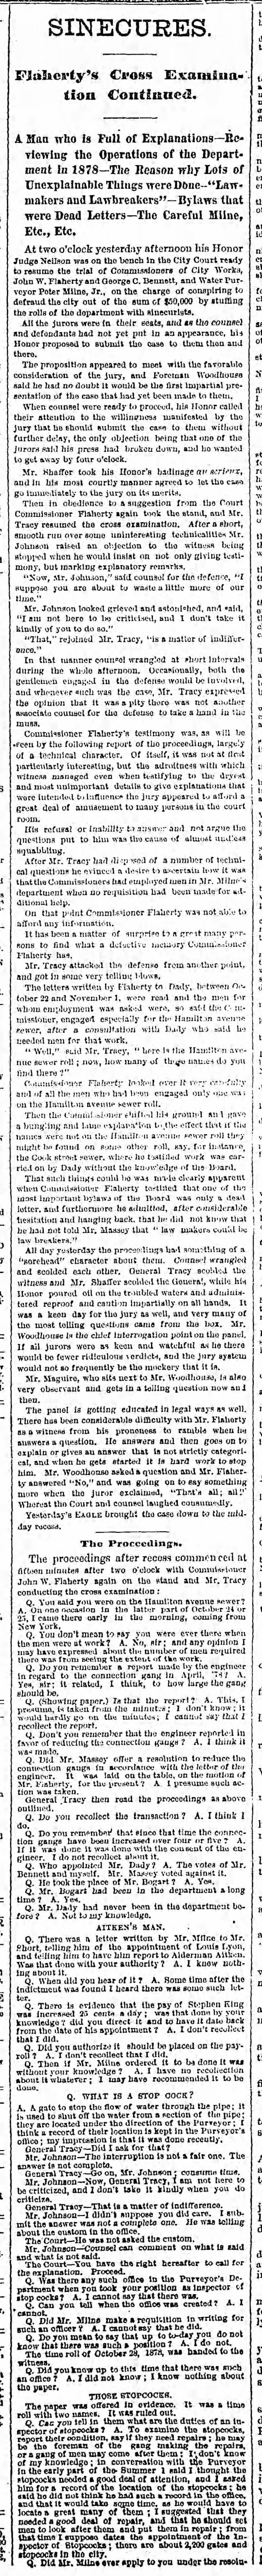 Wednesday, April 30, 1879 - Page 1 - 1 of 2